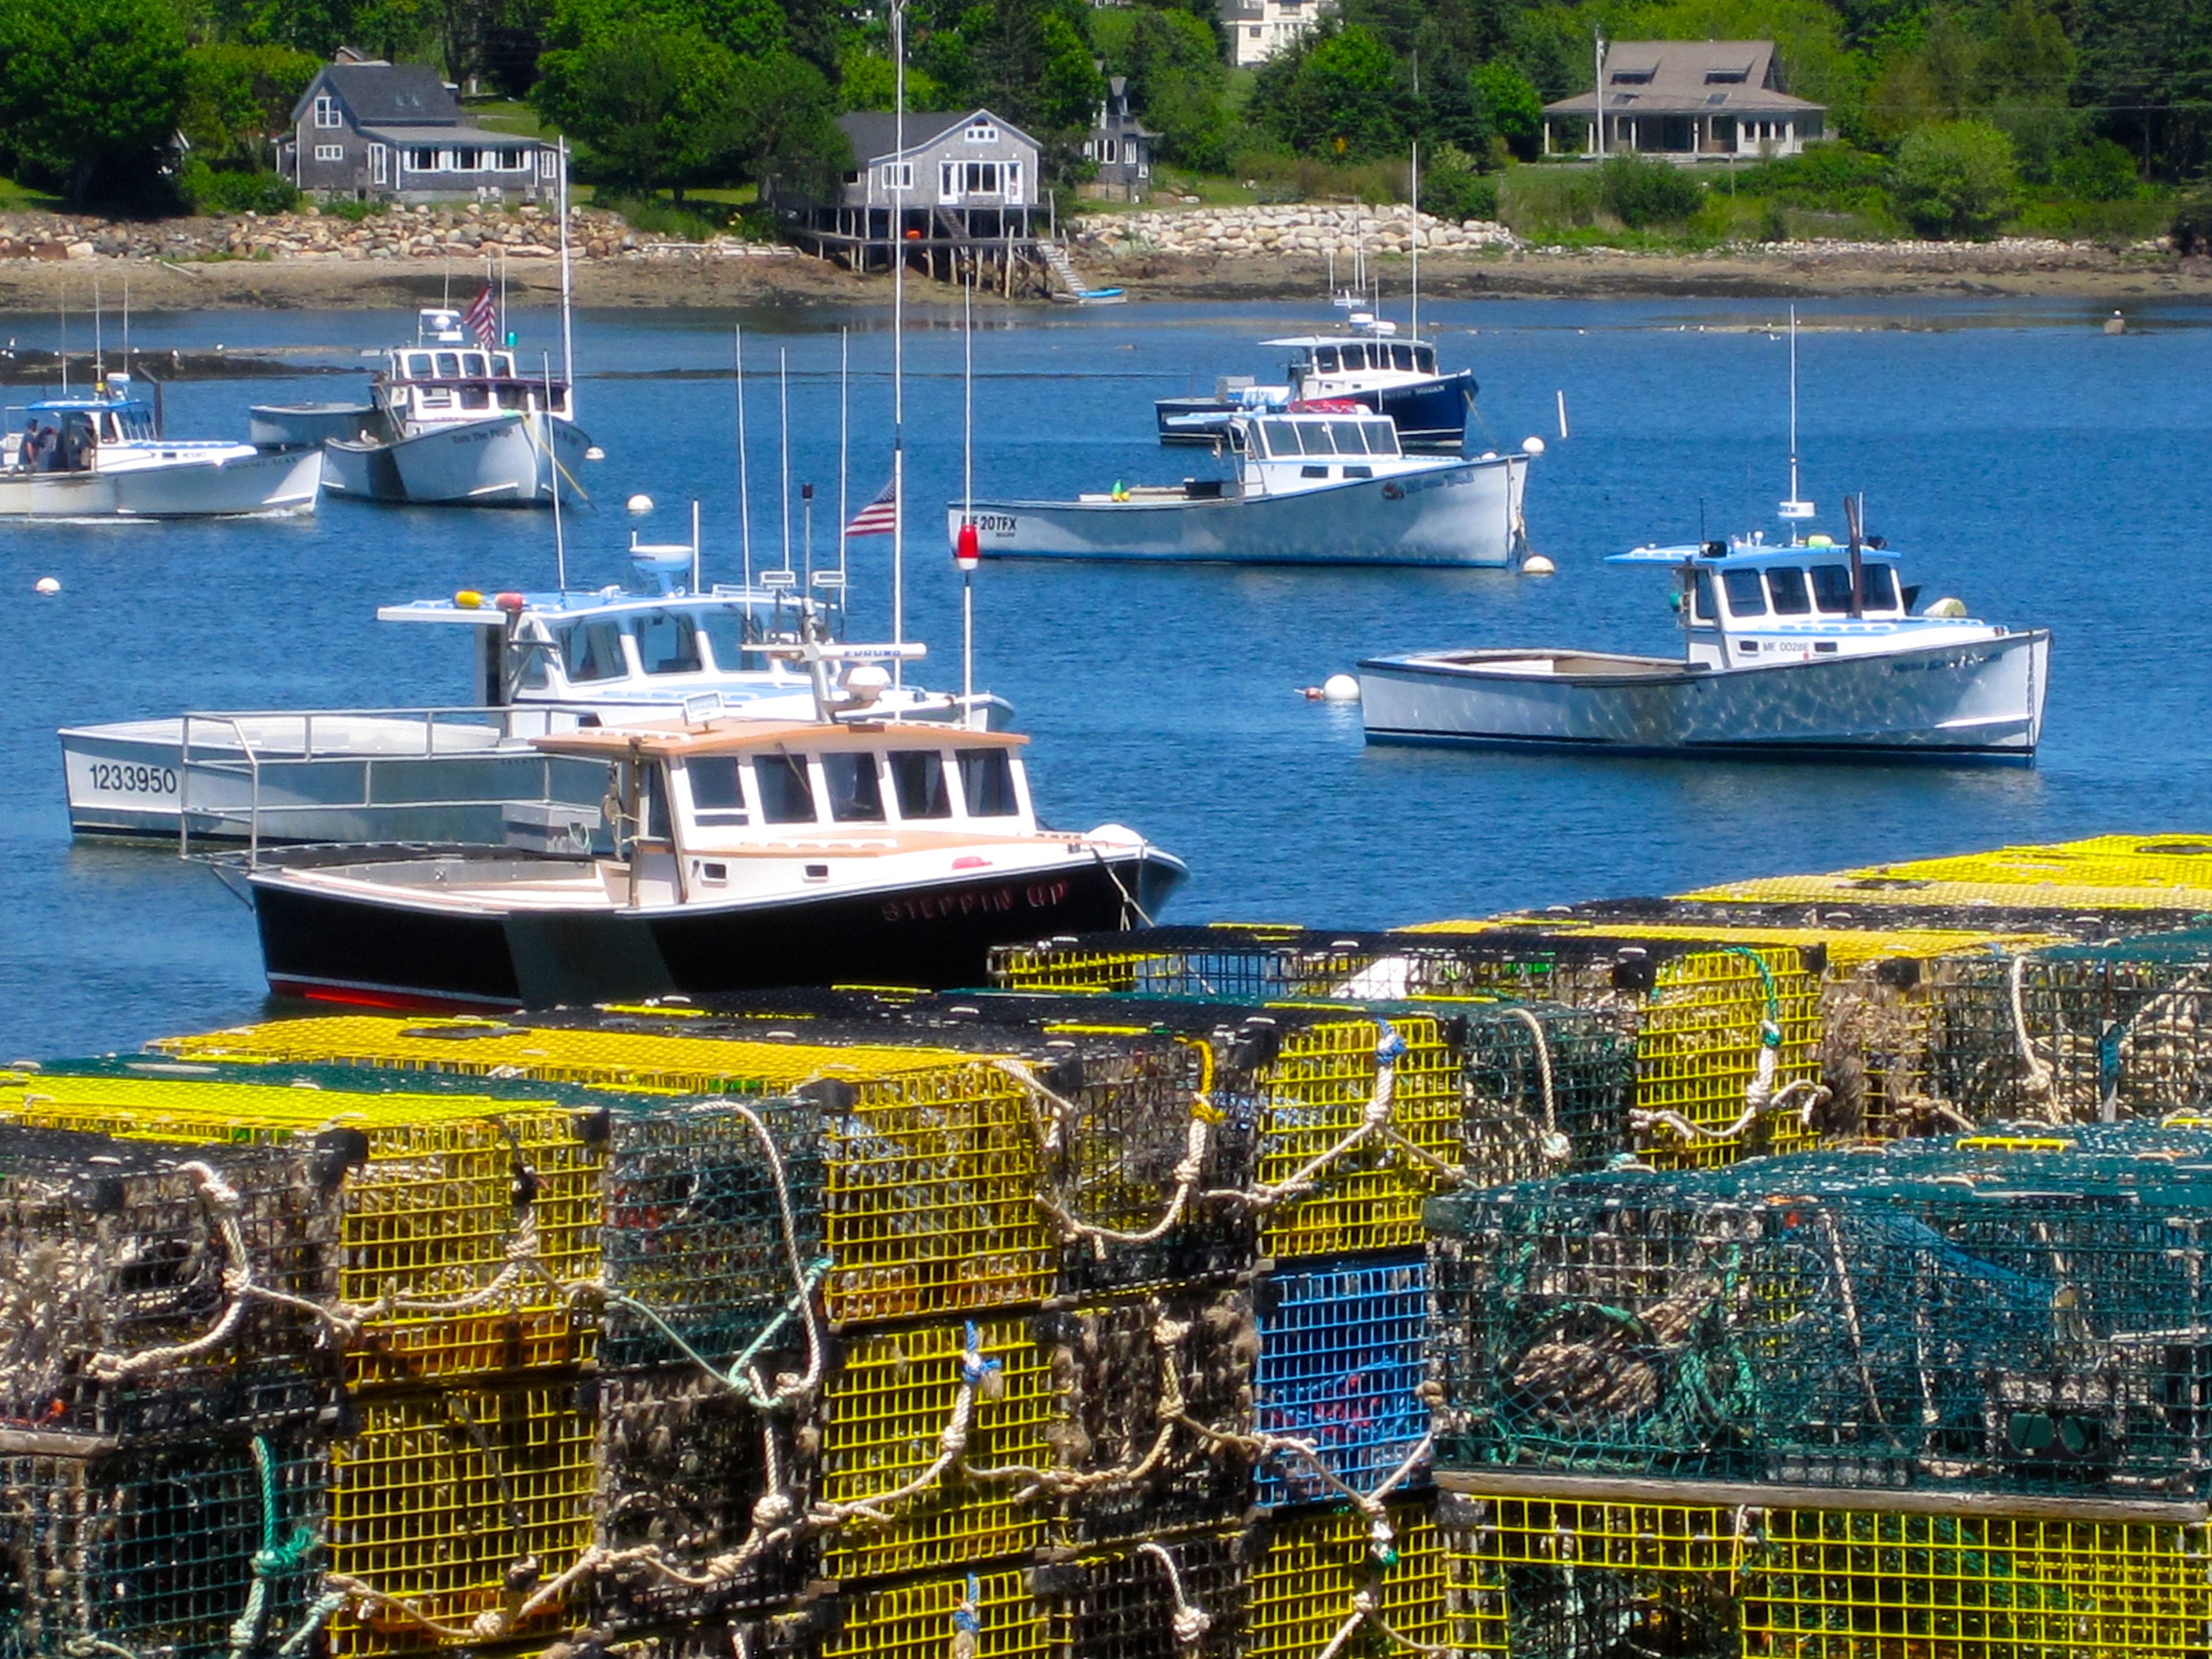 UMaine's 'hot water' study will examine lobster industry's vulnerable areas - Mainebiz